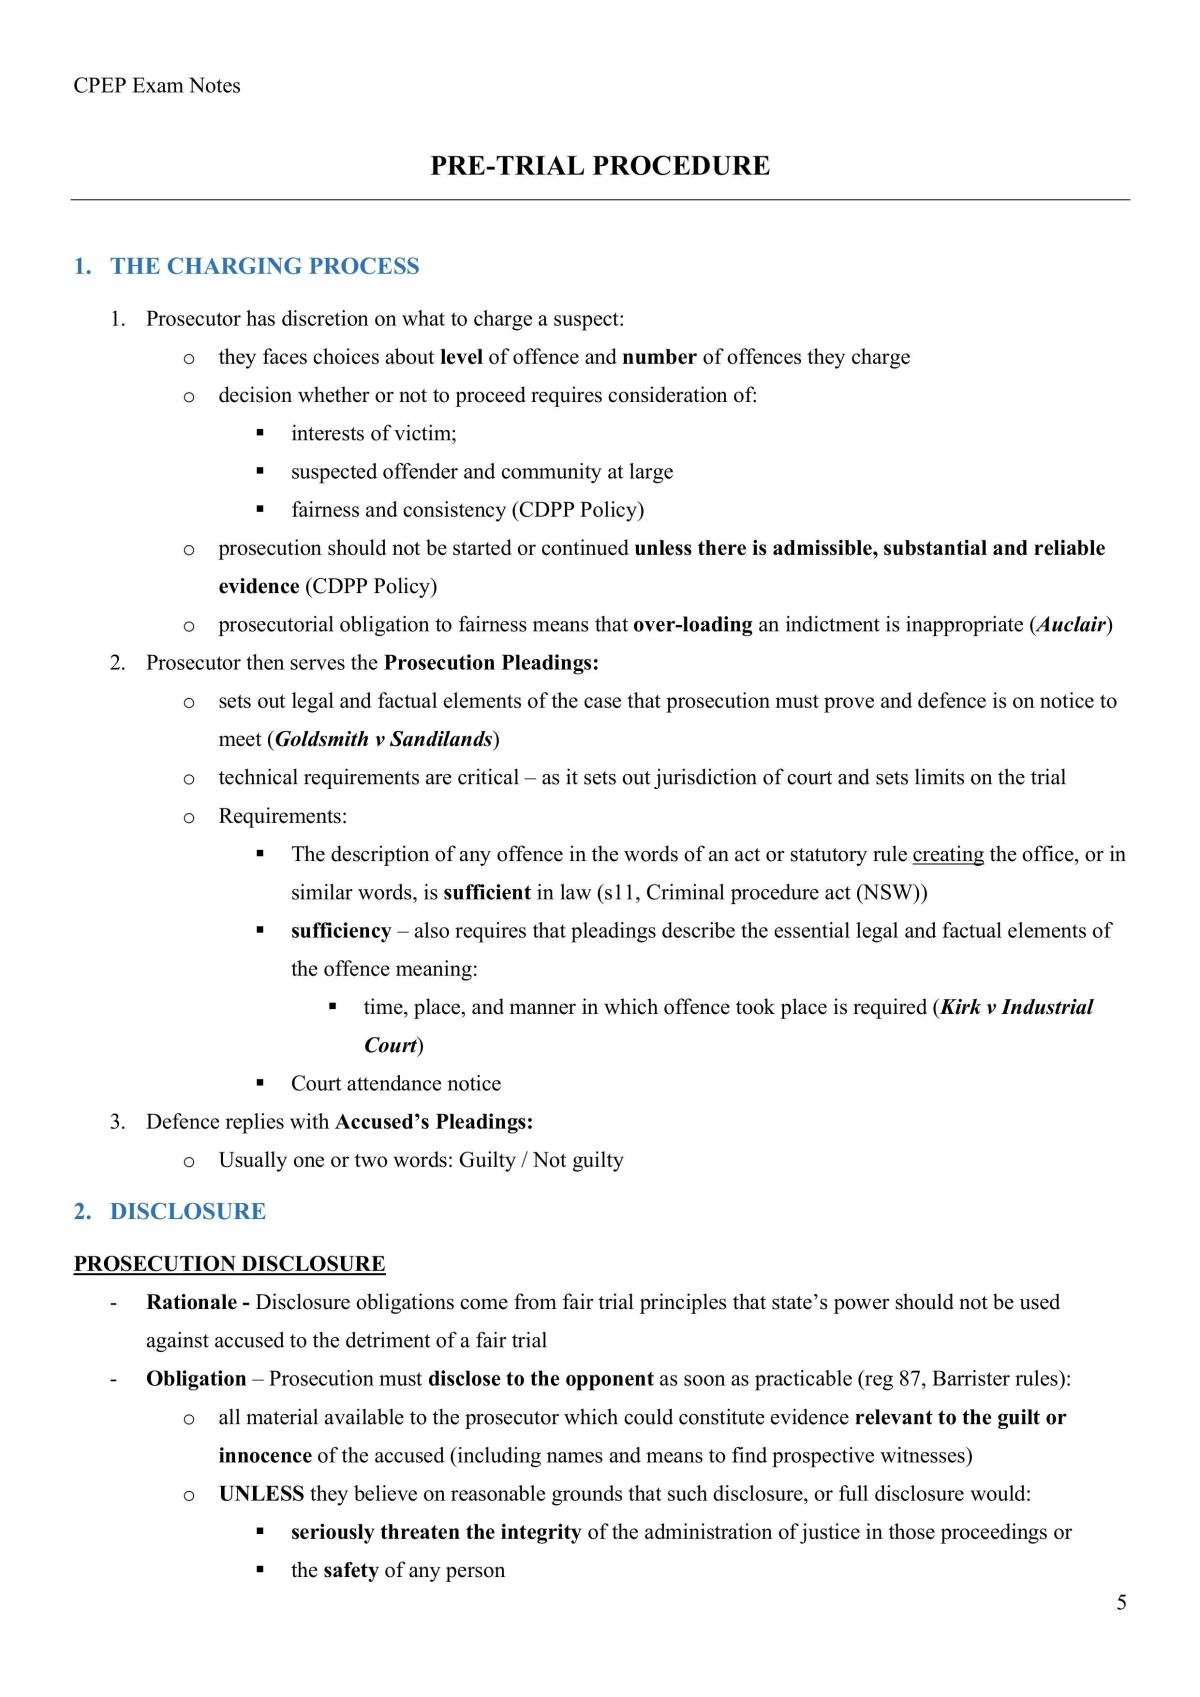 CPEP Exam Notes - Page 5